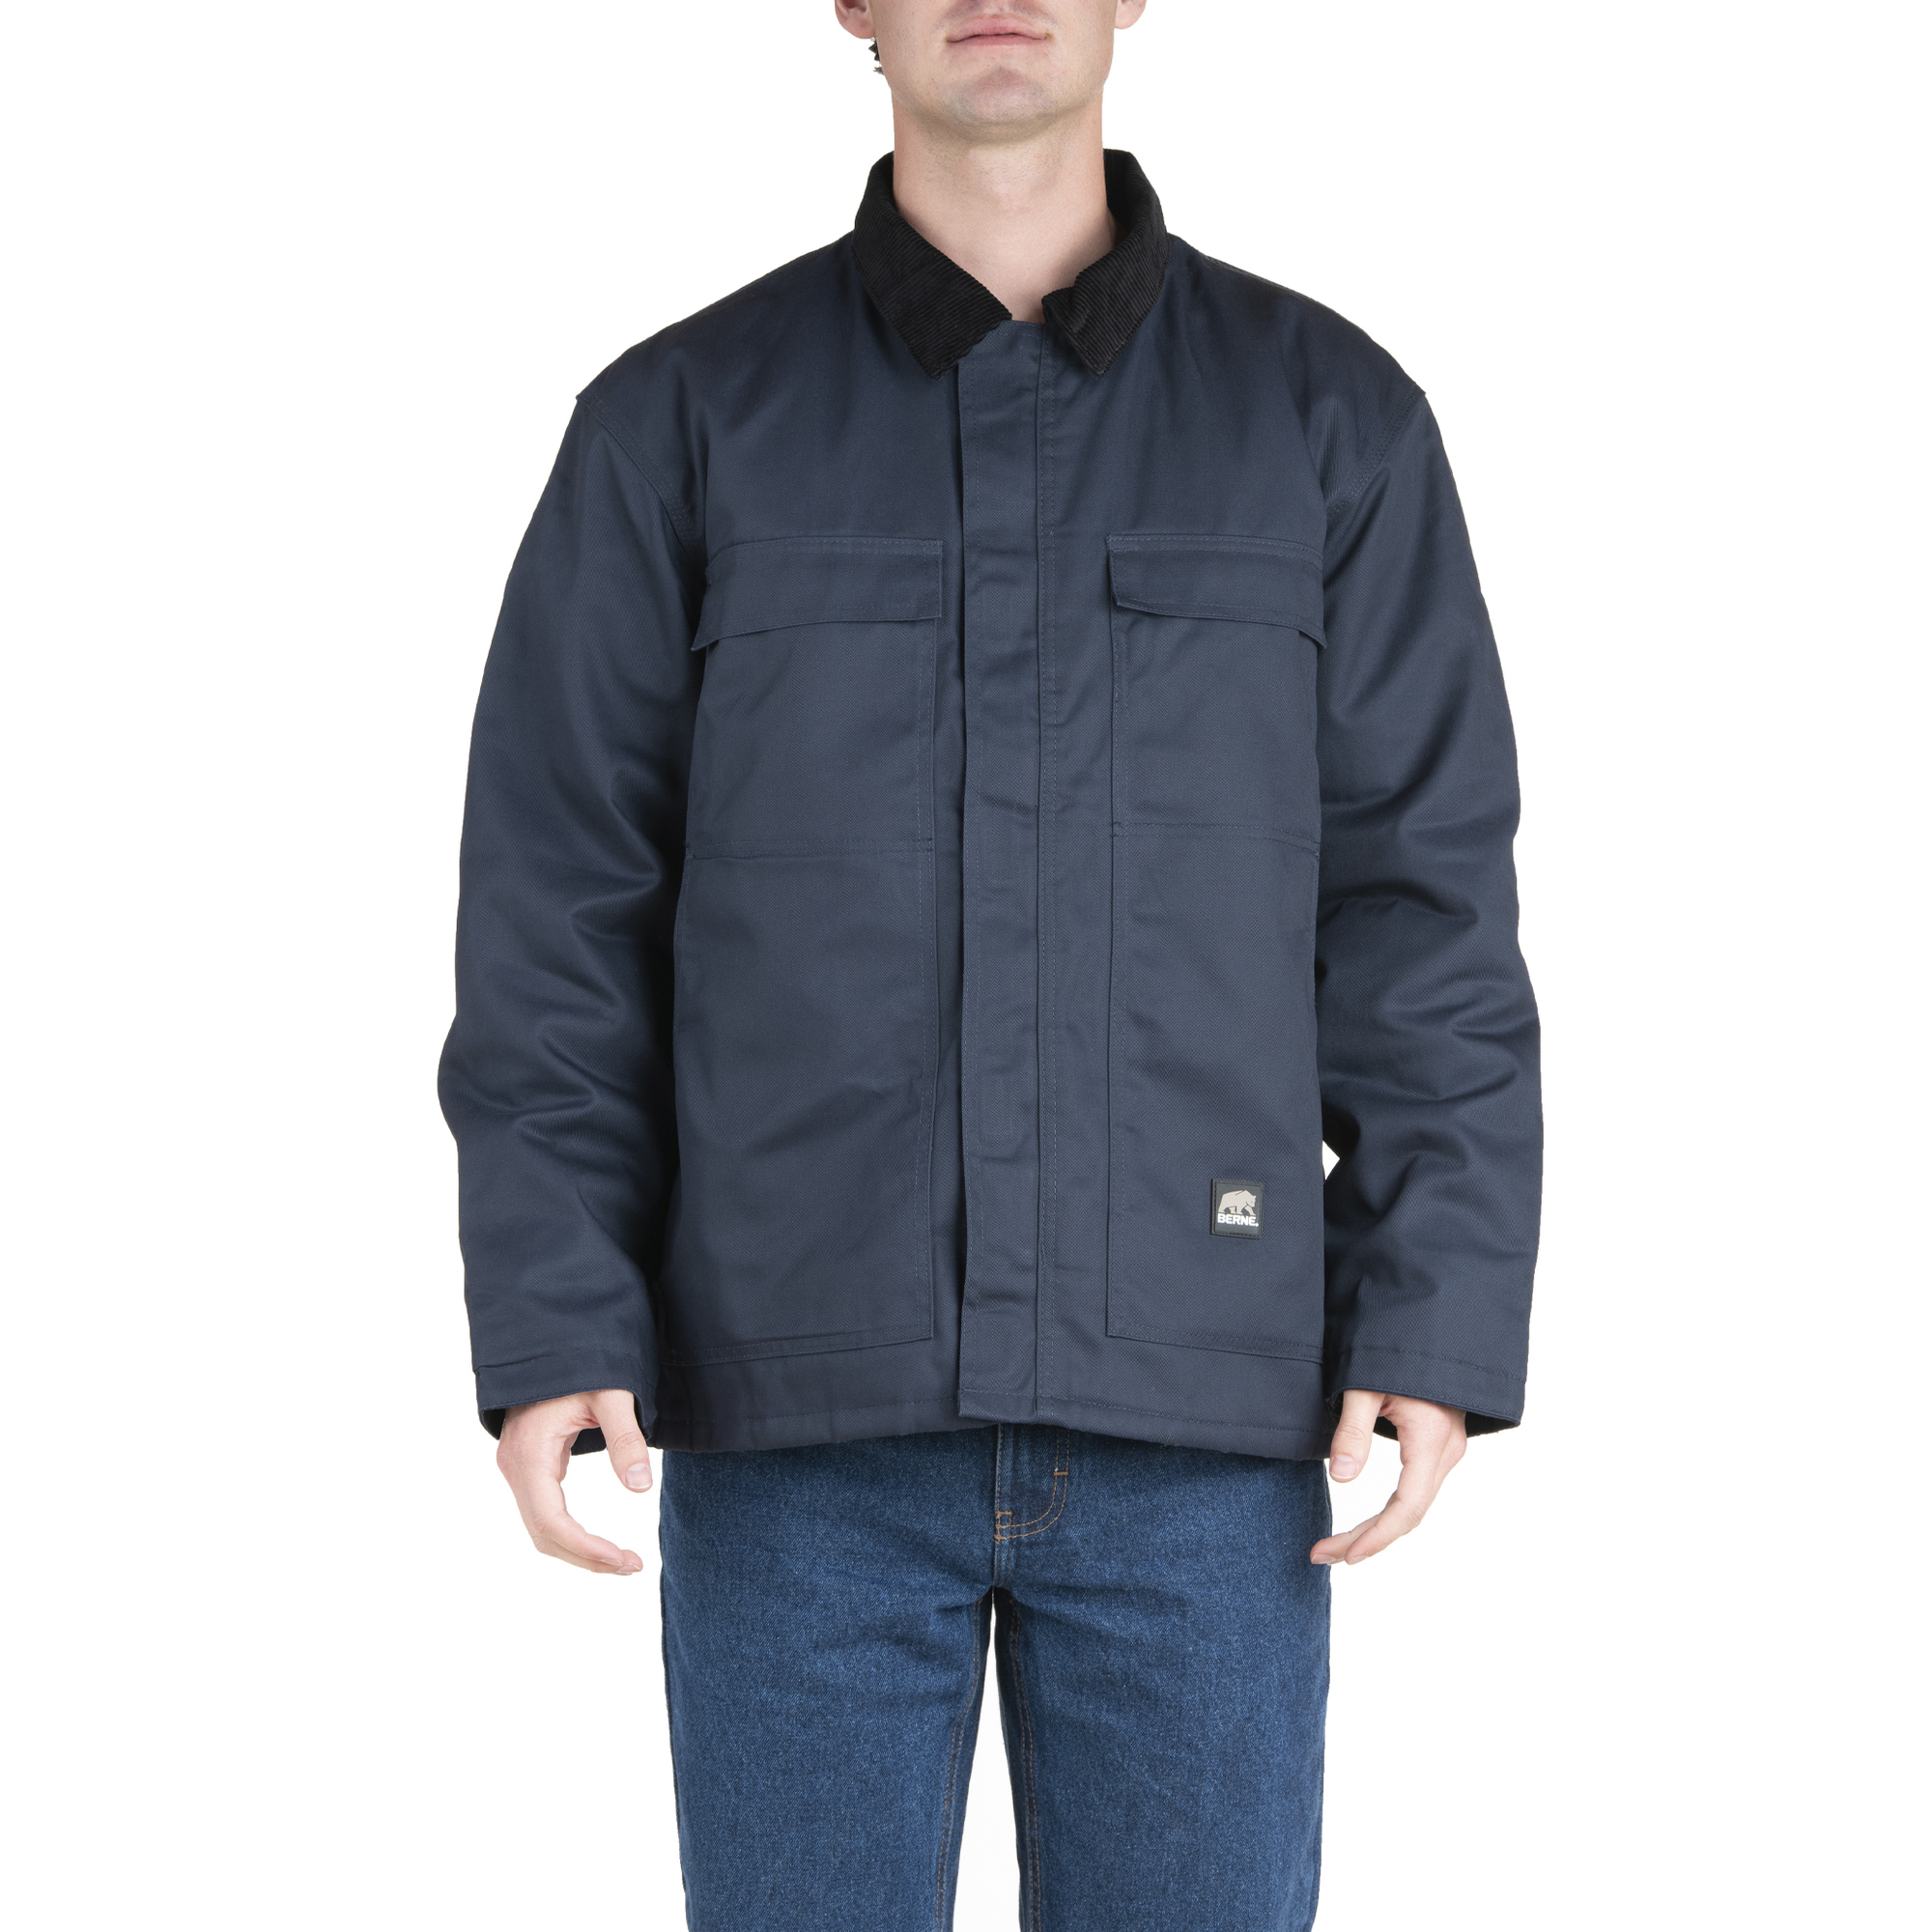 Berne Apparel, Heritage Twill Chore Coat, Size LT, Color Navy, Model CH414